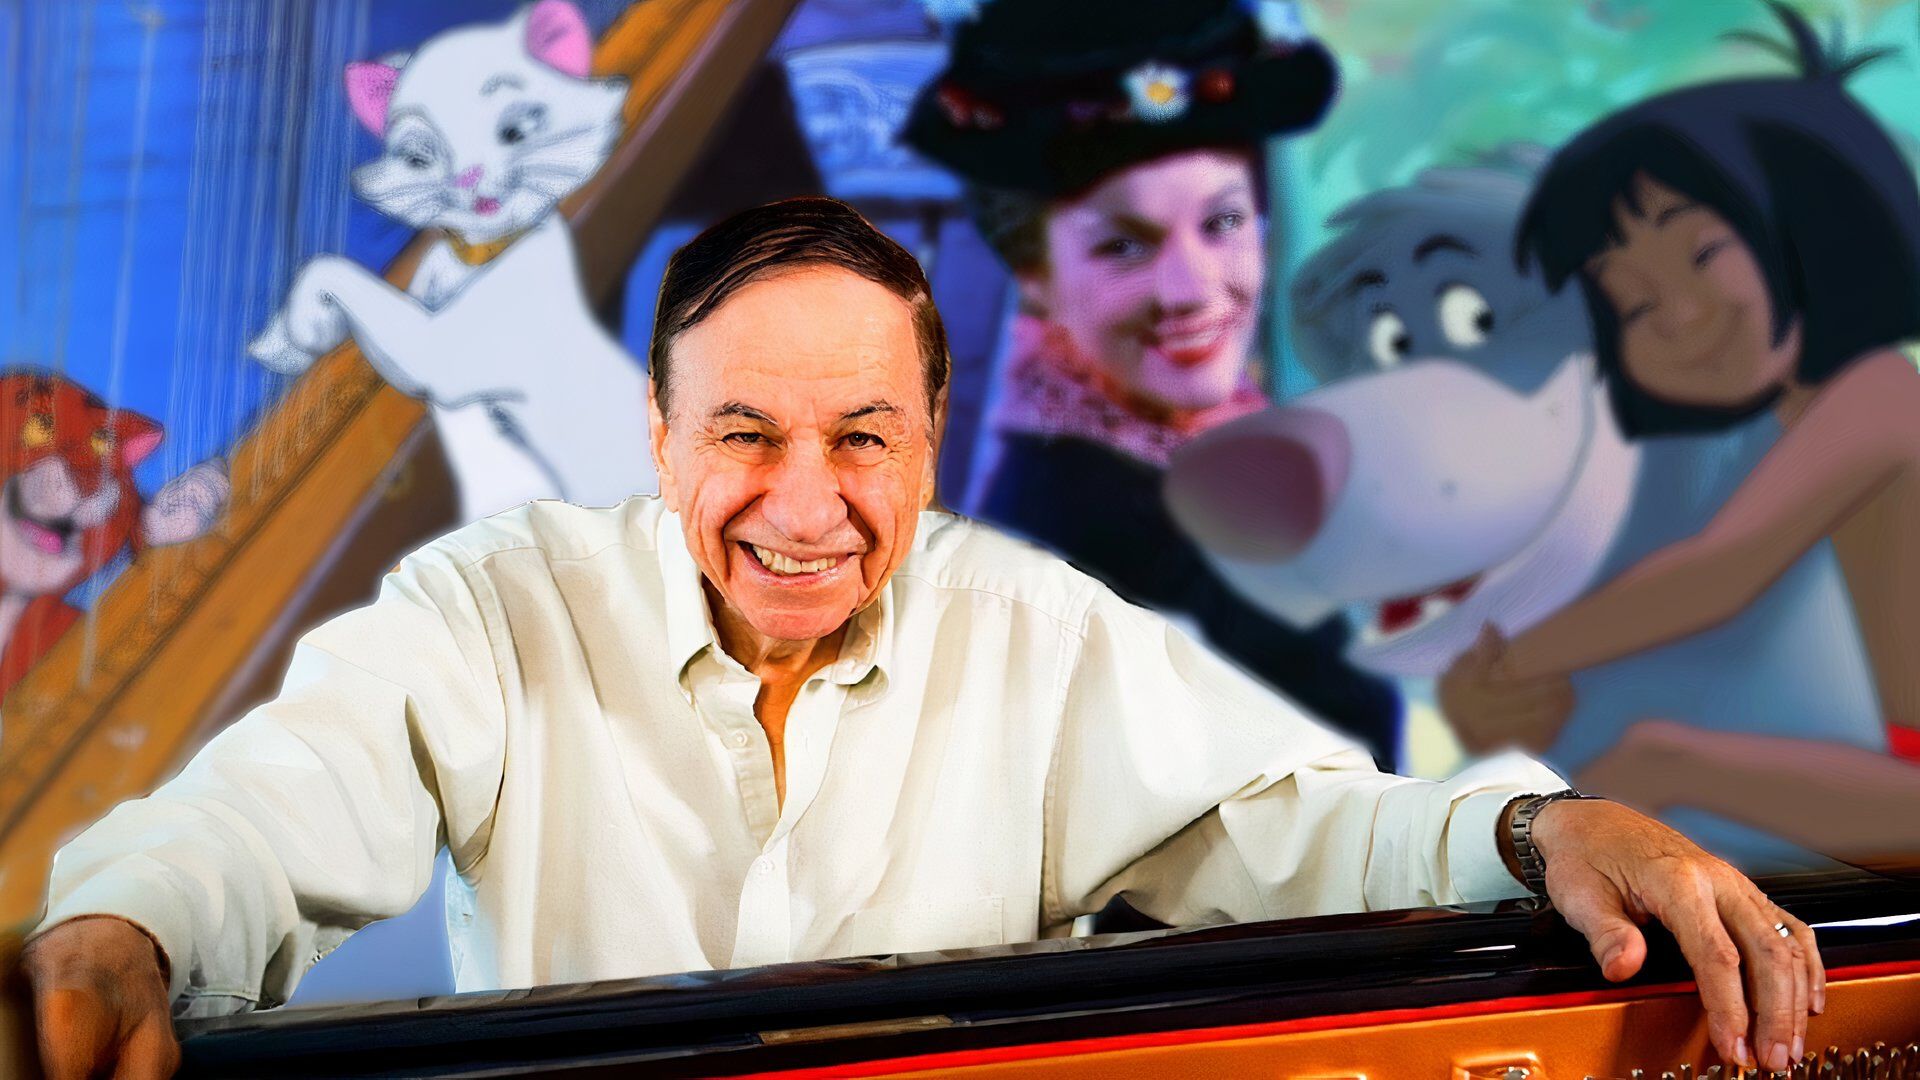 Disney Songwriter Richard M. Sherman Dies Aged 95; Known for His Work on Mary Poppins, The Jungle Book and Many More Movies